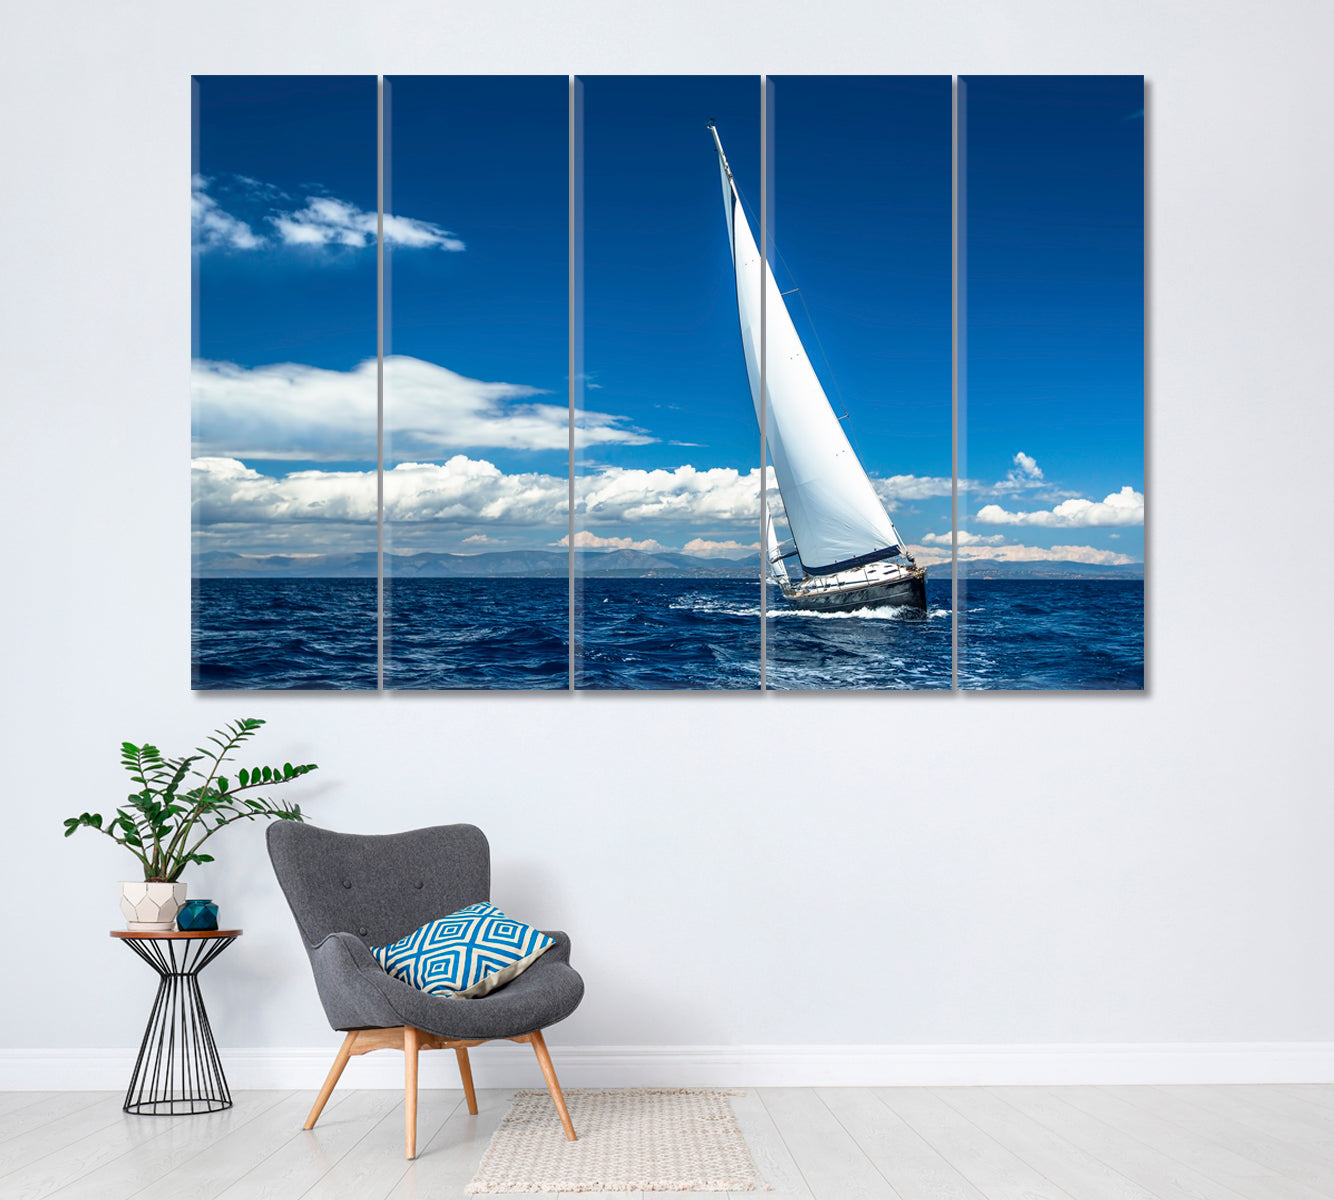 Sailing Ship in Sea Canvas Print ArtLexy 5 Panels 36"x24" inches 